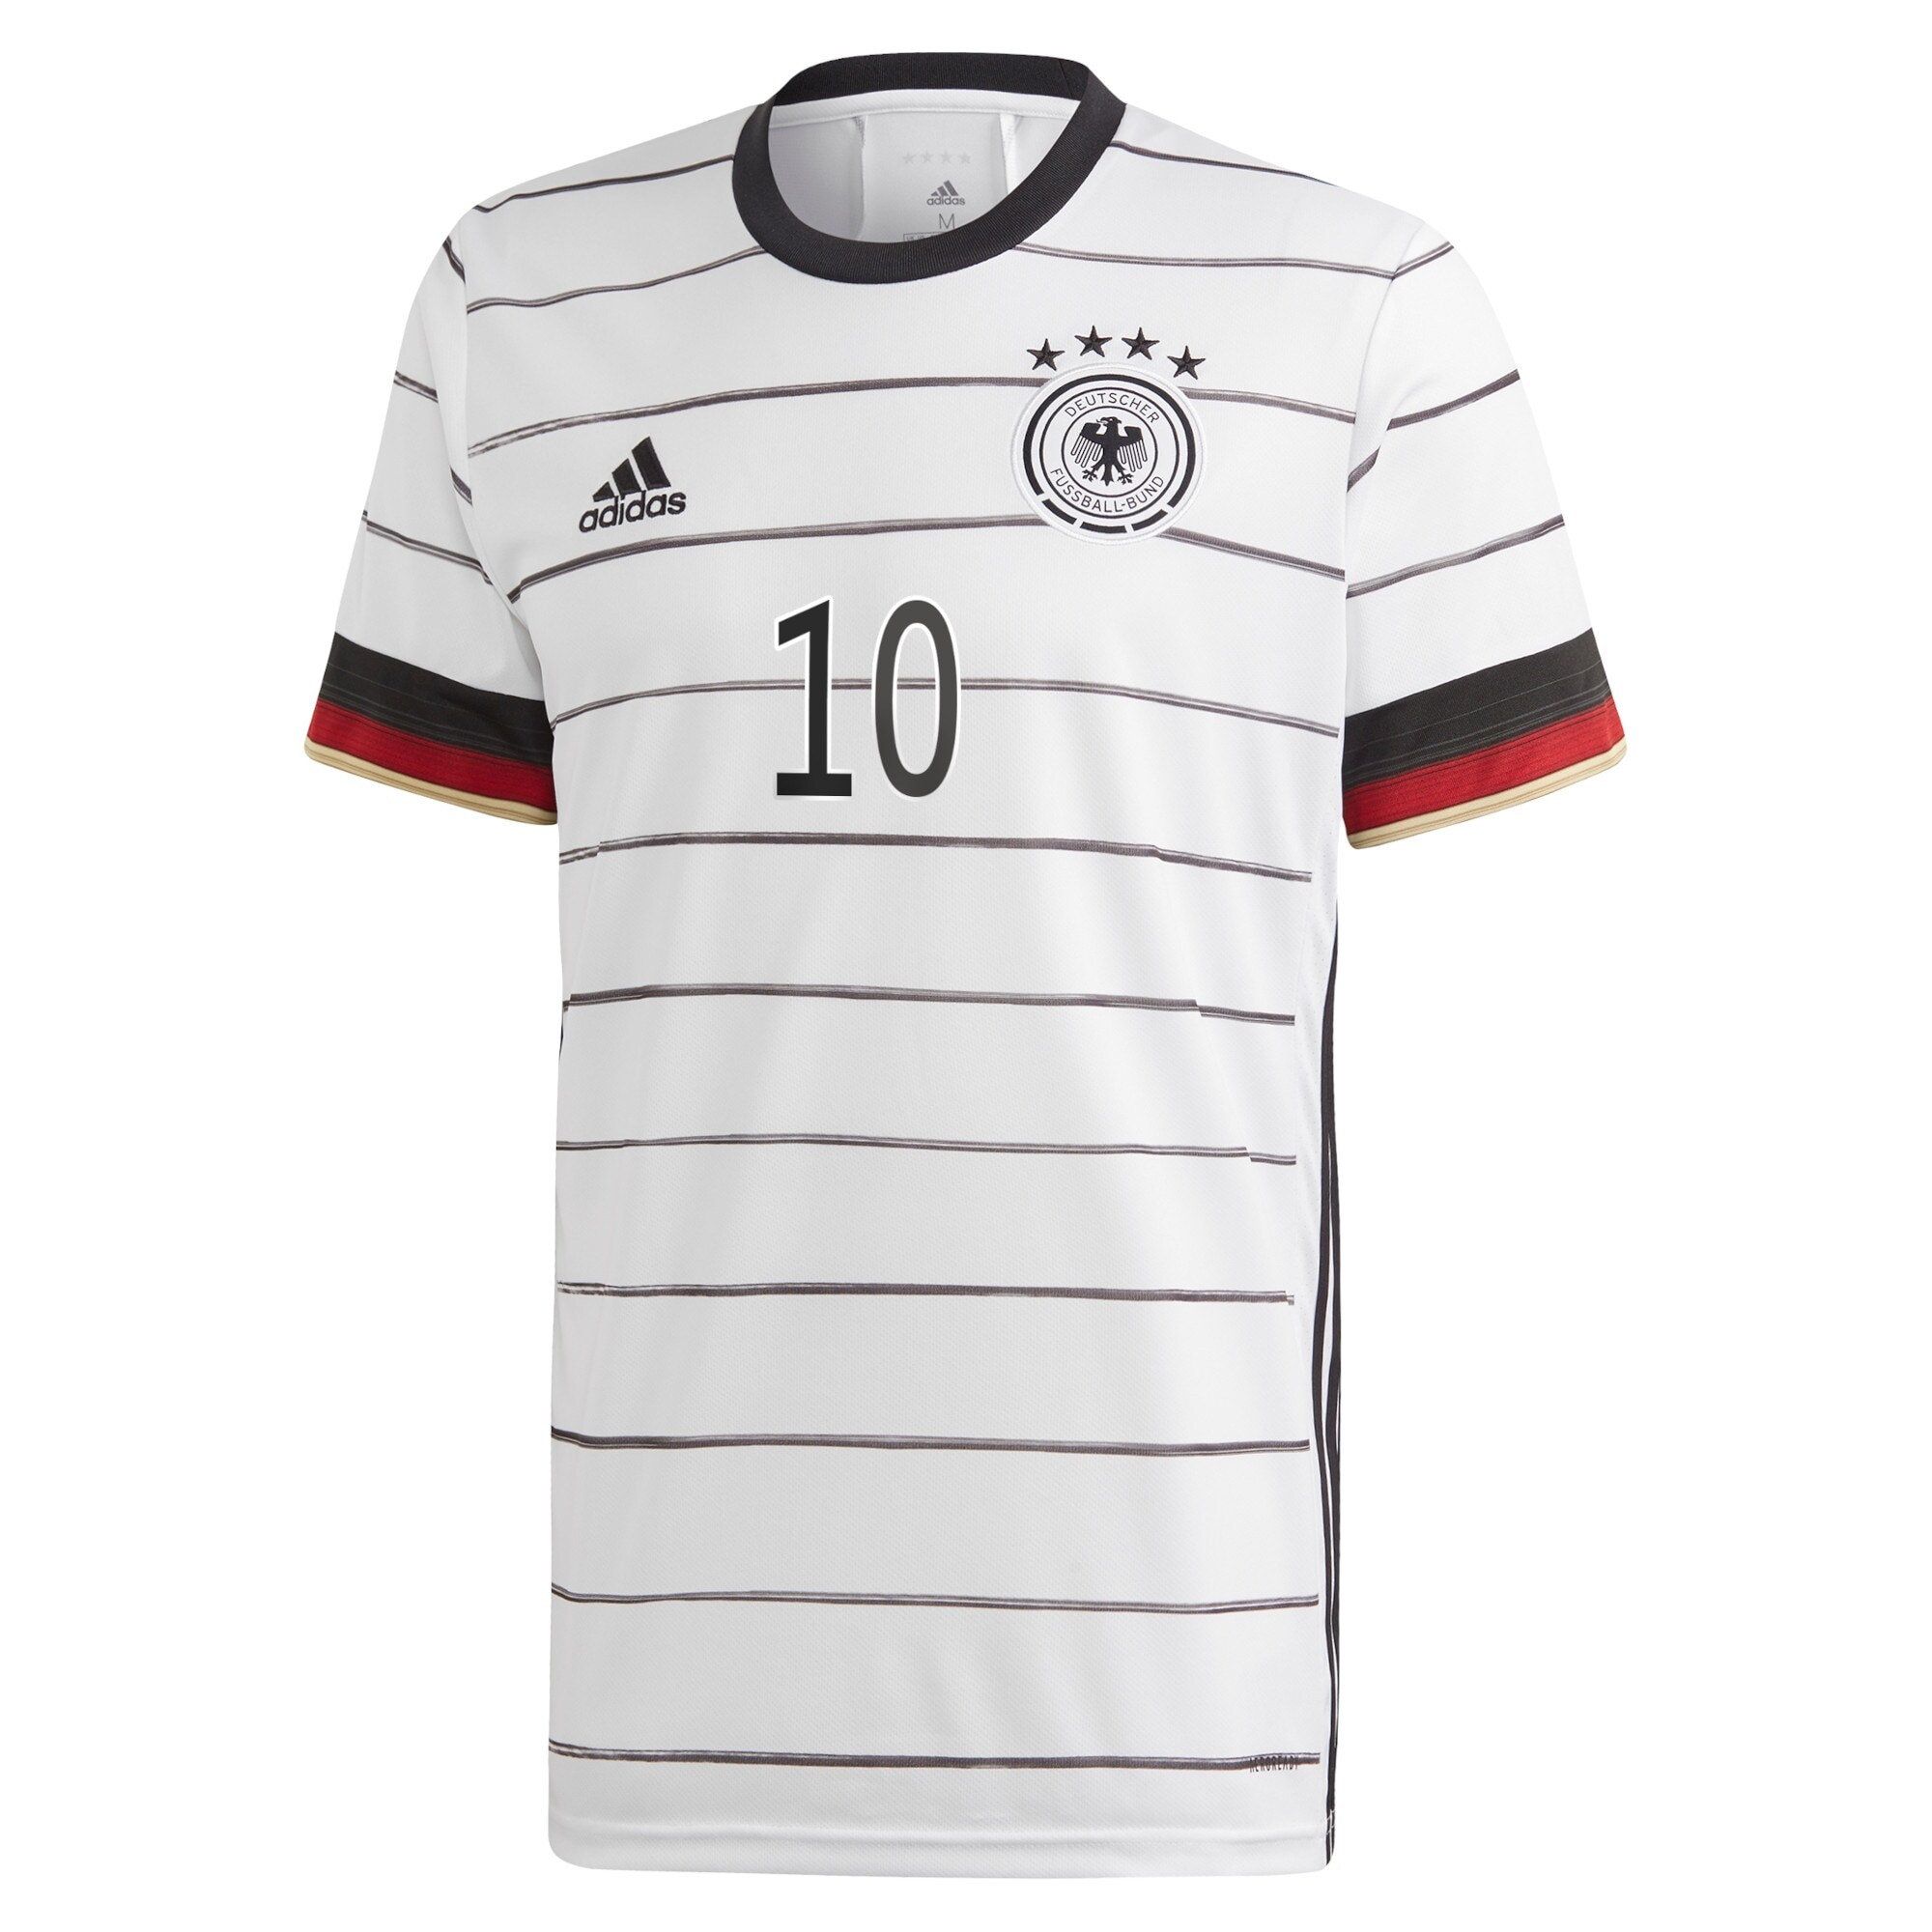 Germany Home Shirt 2019-21 with Gnabry 10 printing